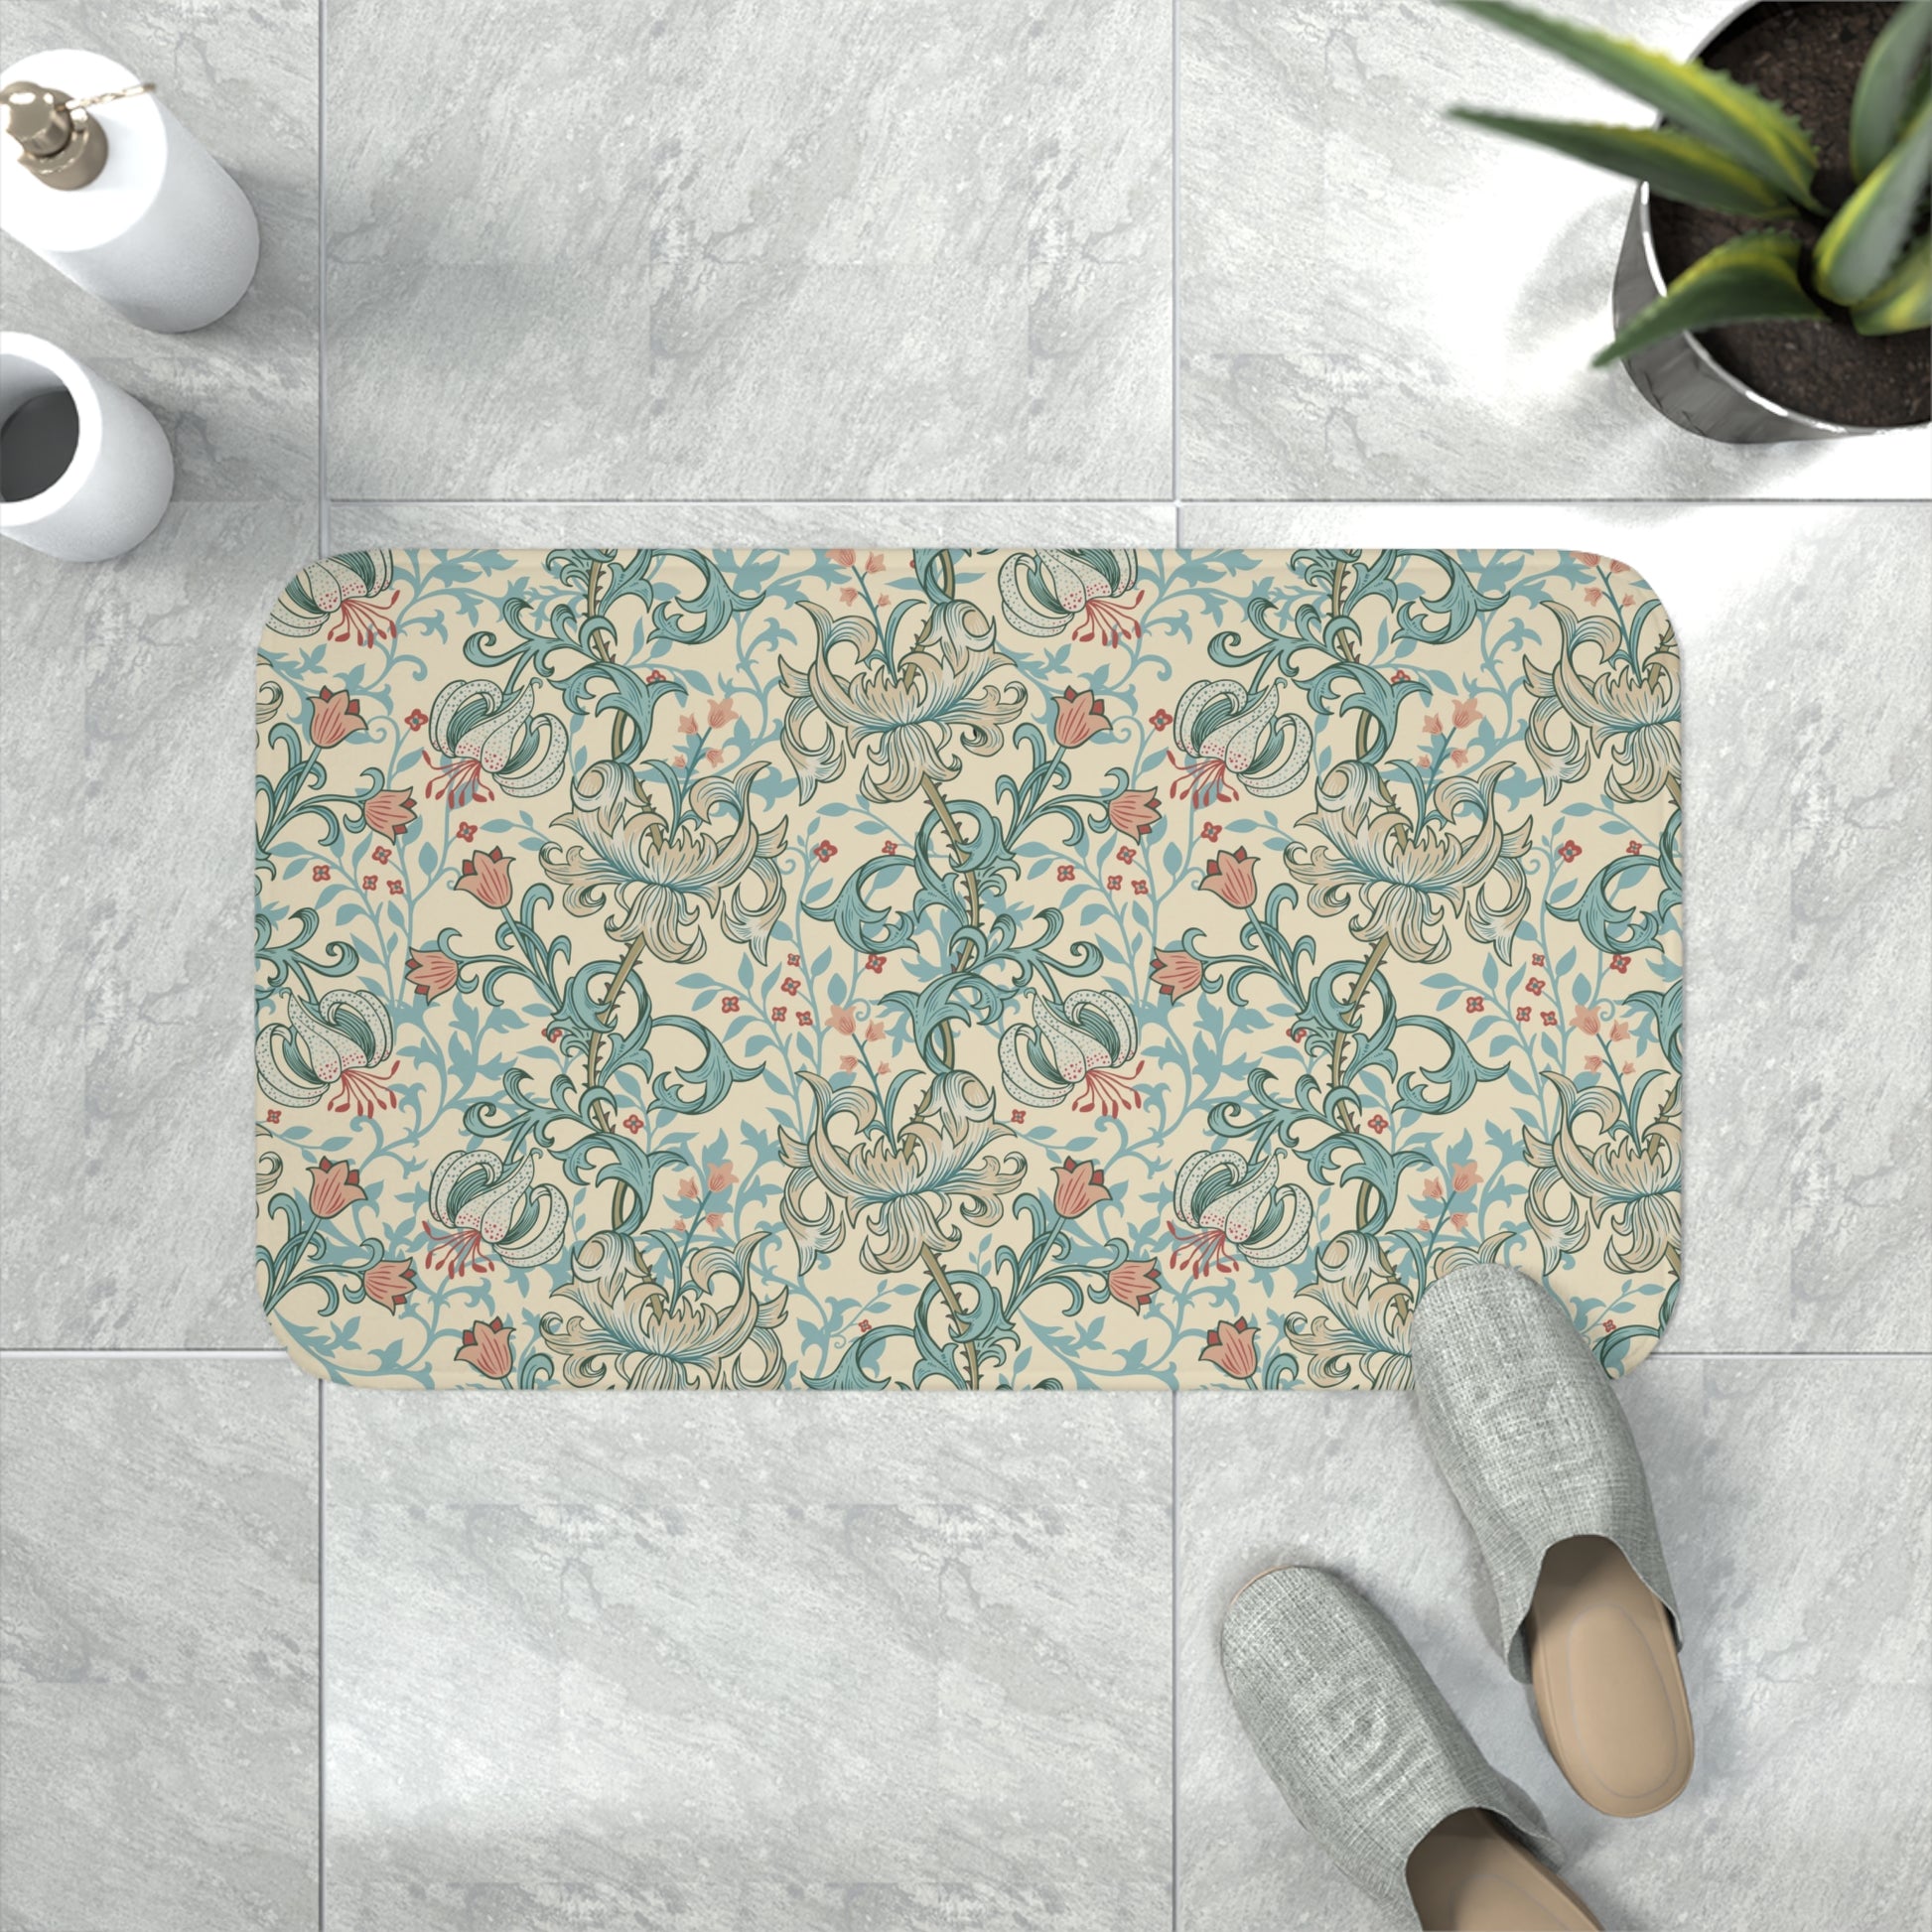 william-morris-co-memory-foam-bath-mat-golden-lily-collection-mineral-2